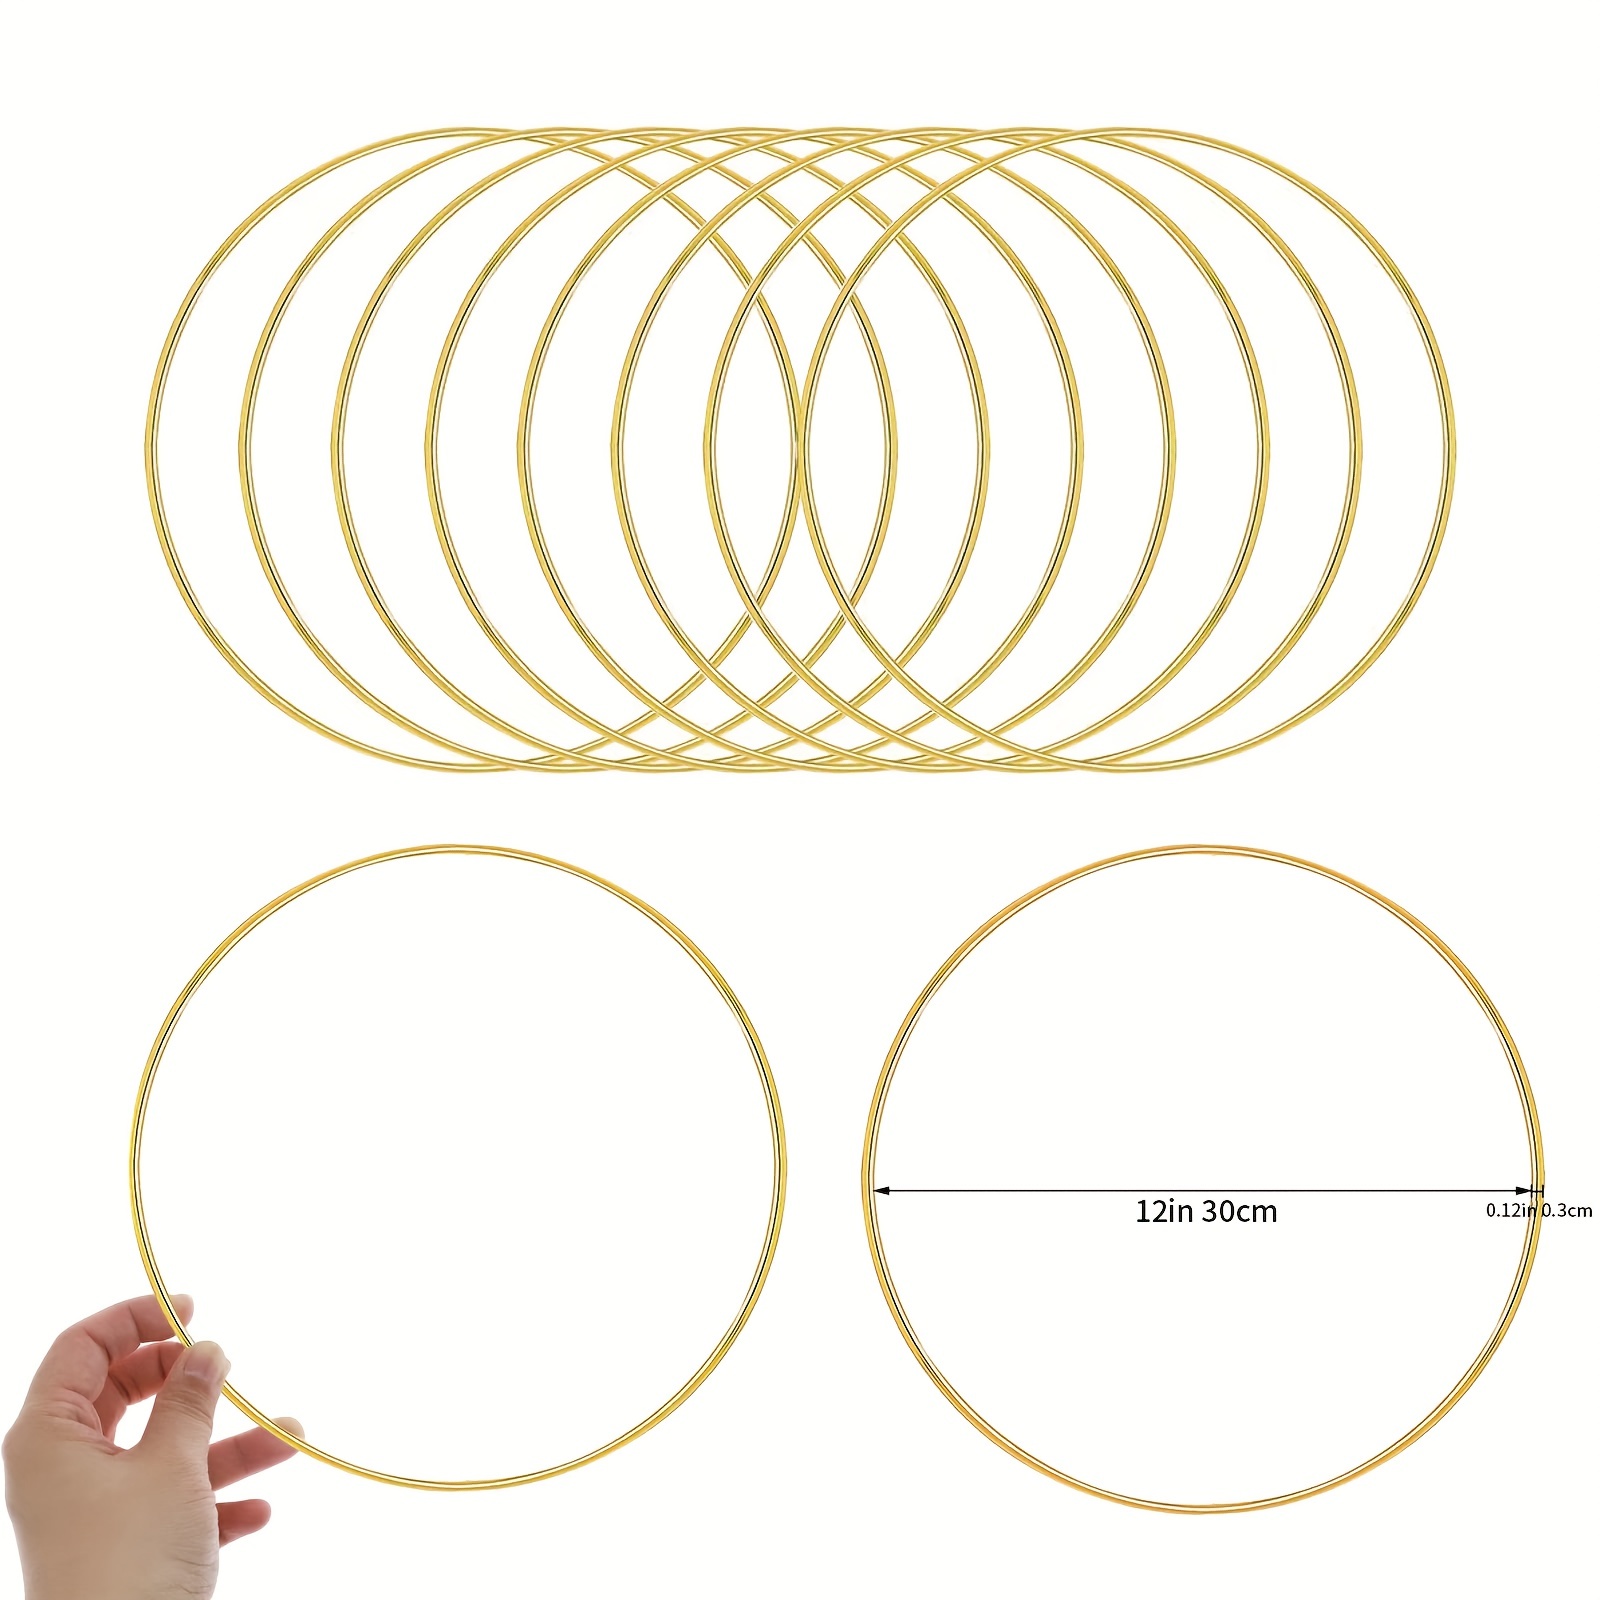  Metal Rings Hoops Macrame Rings for Dream Catcher and Crafts  (Gold, 6 Inch) : Arts, Crafts & Sewing